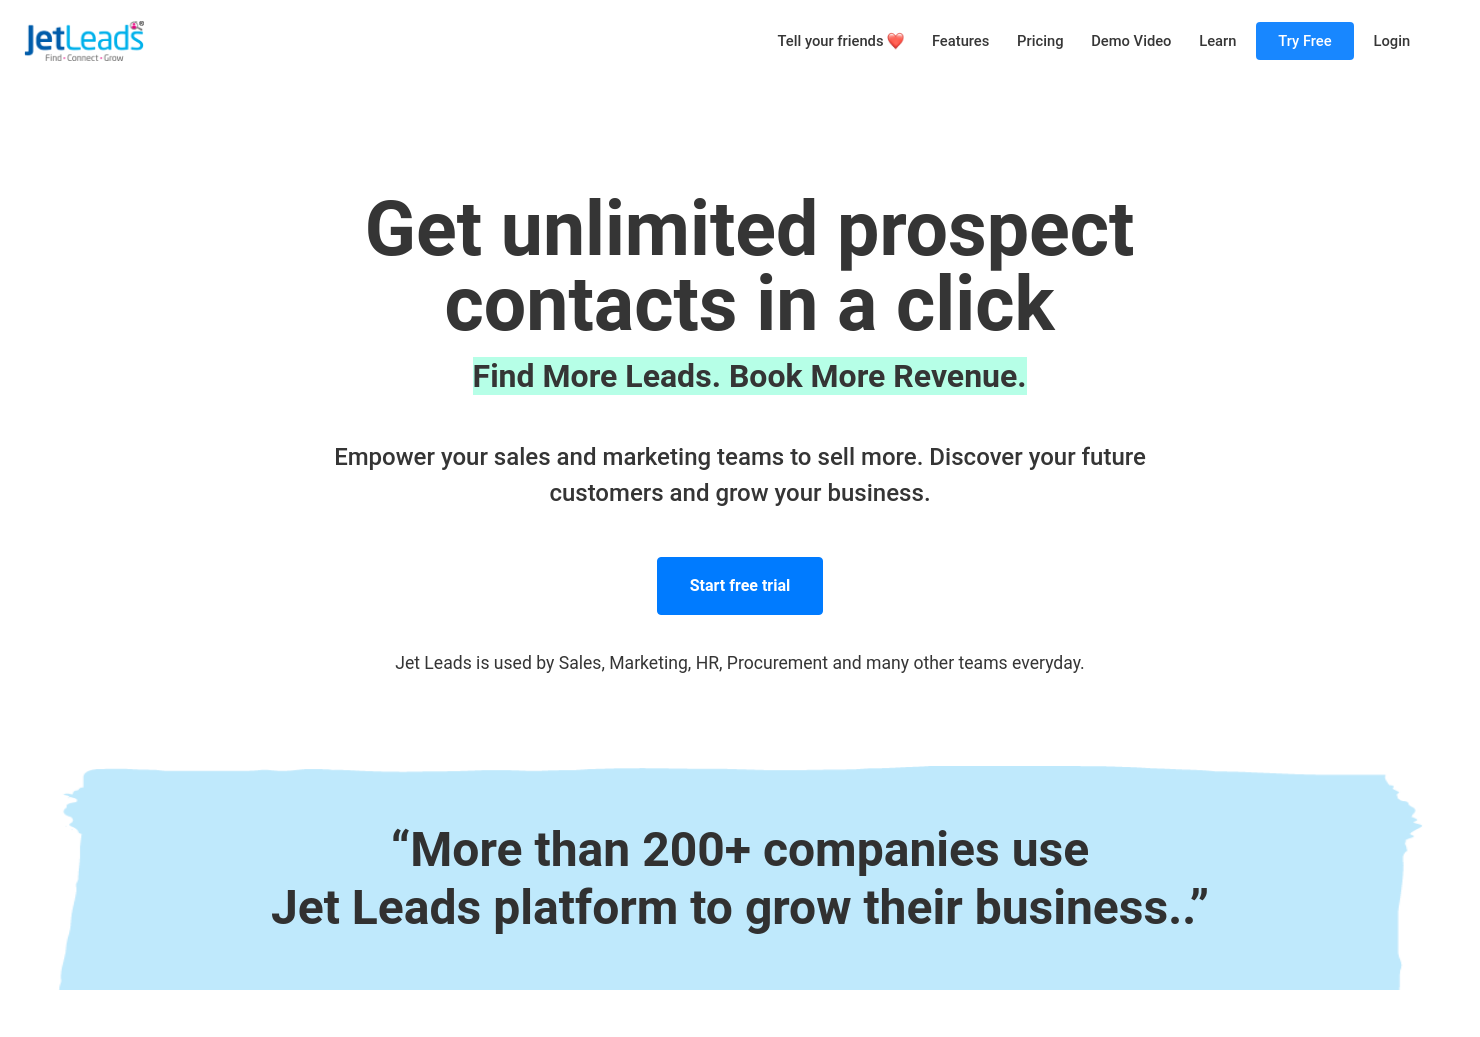 startuptile Jetleads-Unlimited prospect contacts in a click